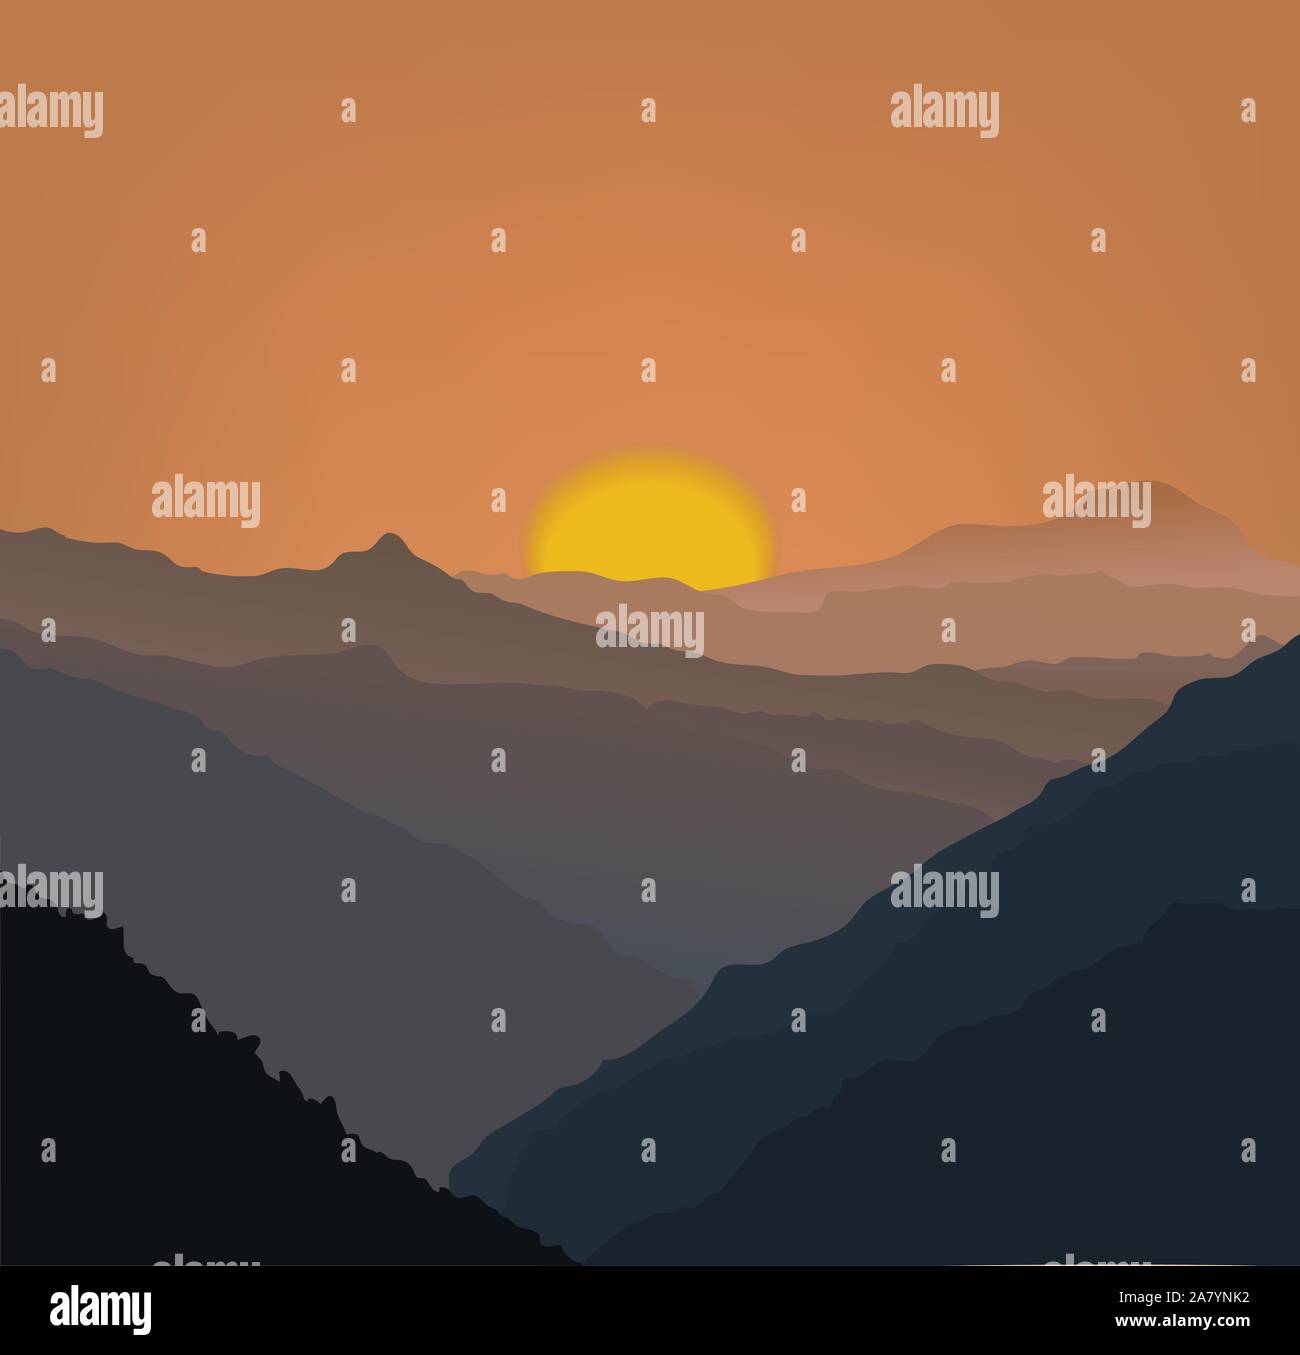 Beige mountains in a fog. Seamless vector illustration Stock Vector ...